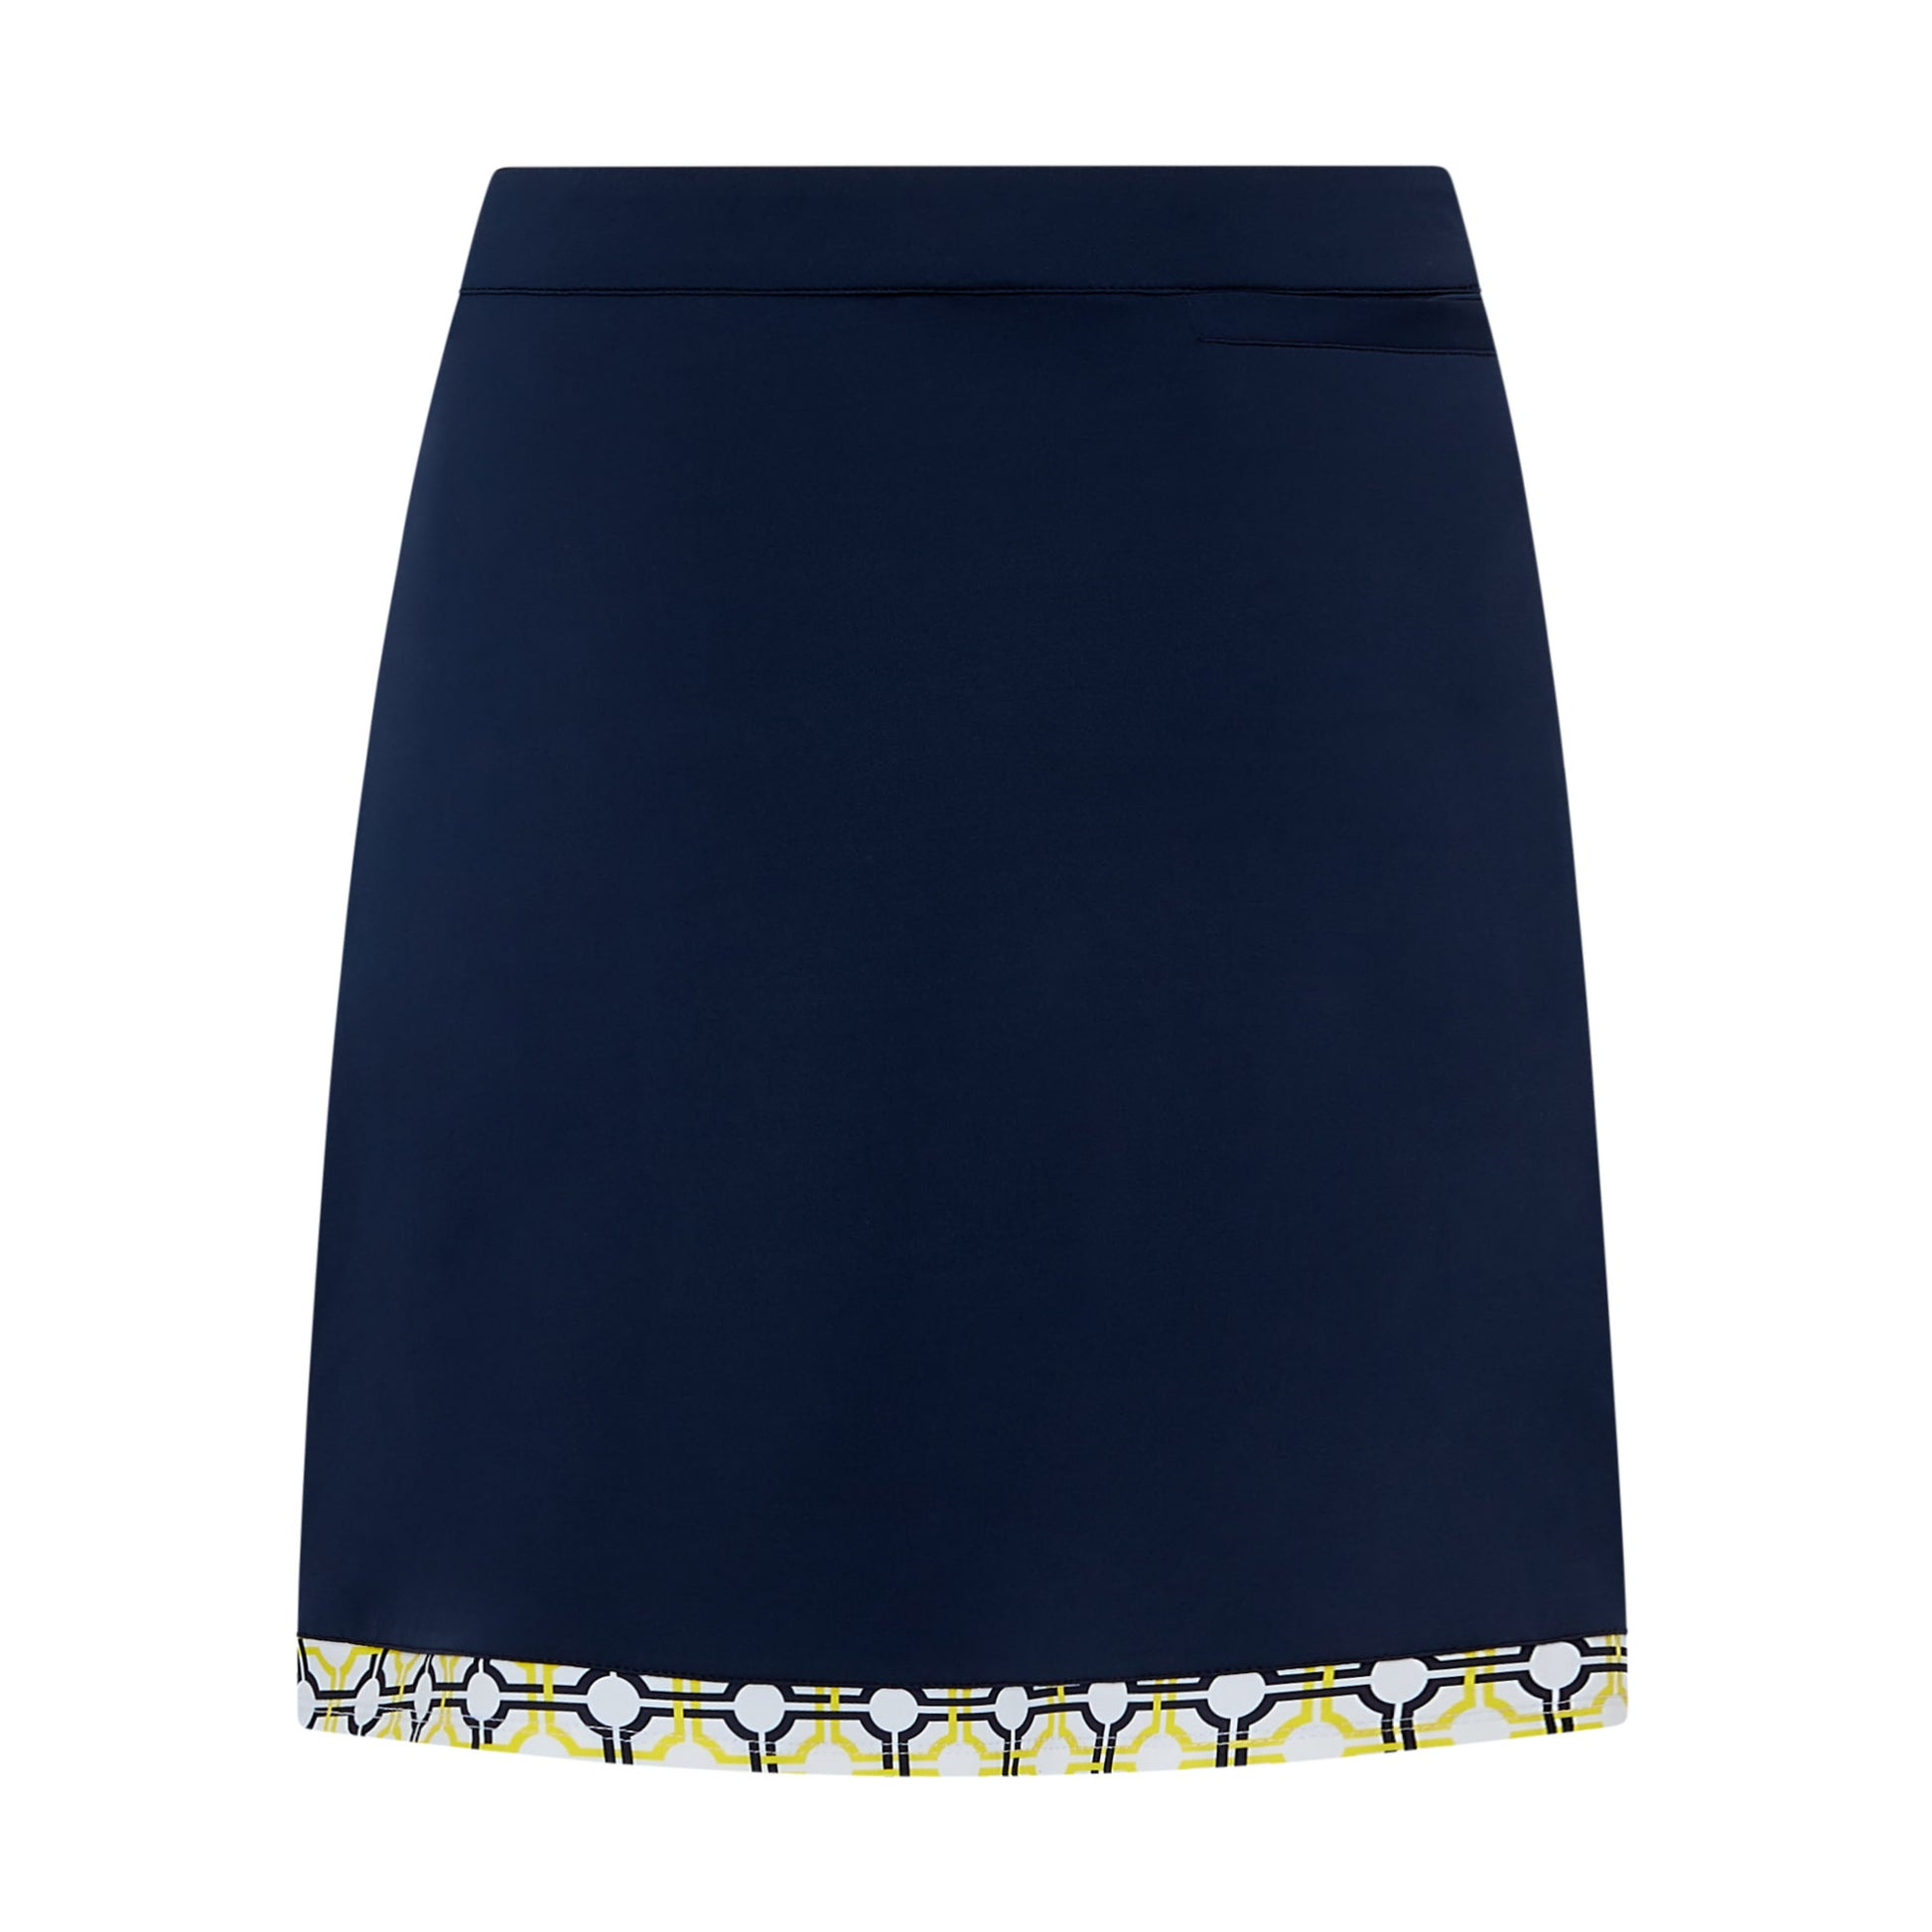 Swing Out Sister Ladies Navy Pull-On Scalloped Skort with Navy and Sunshine Trim